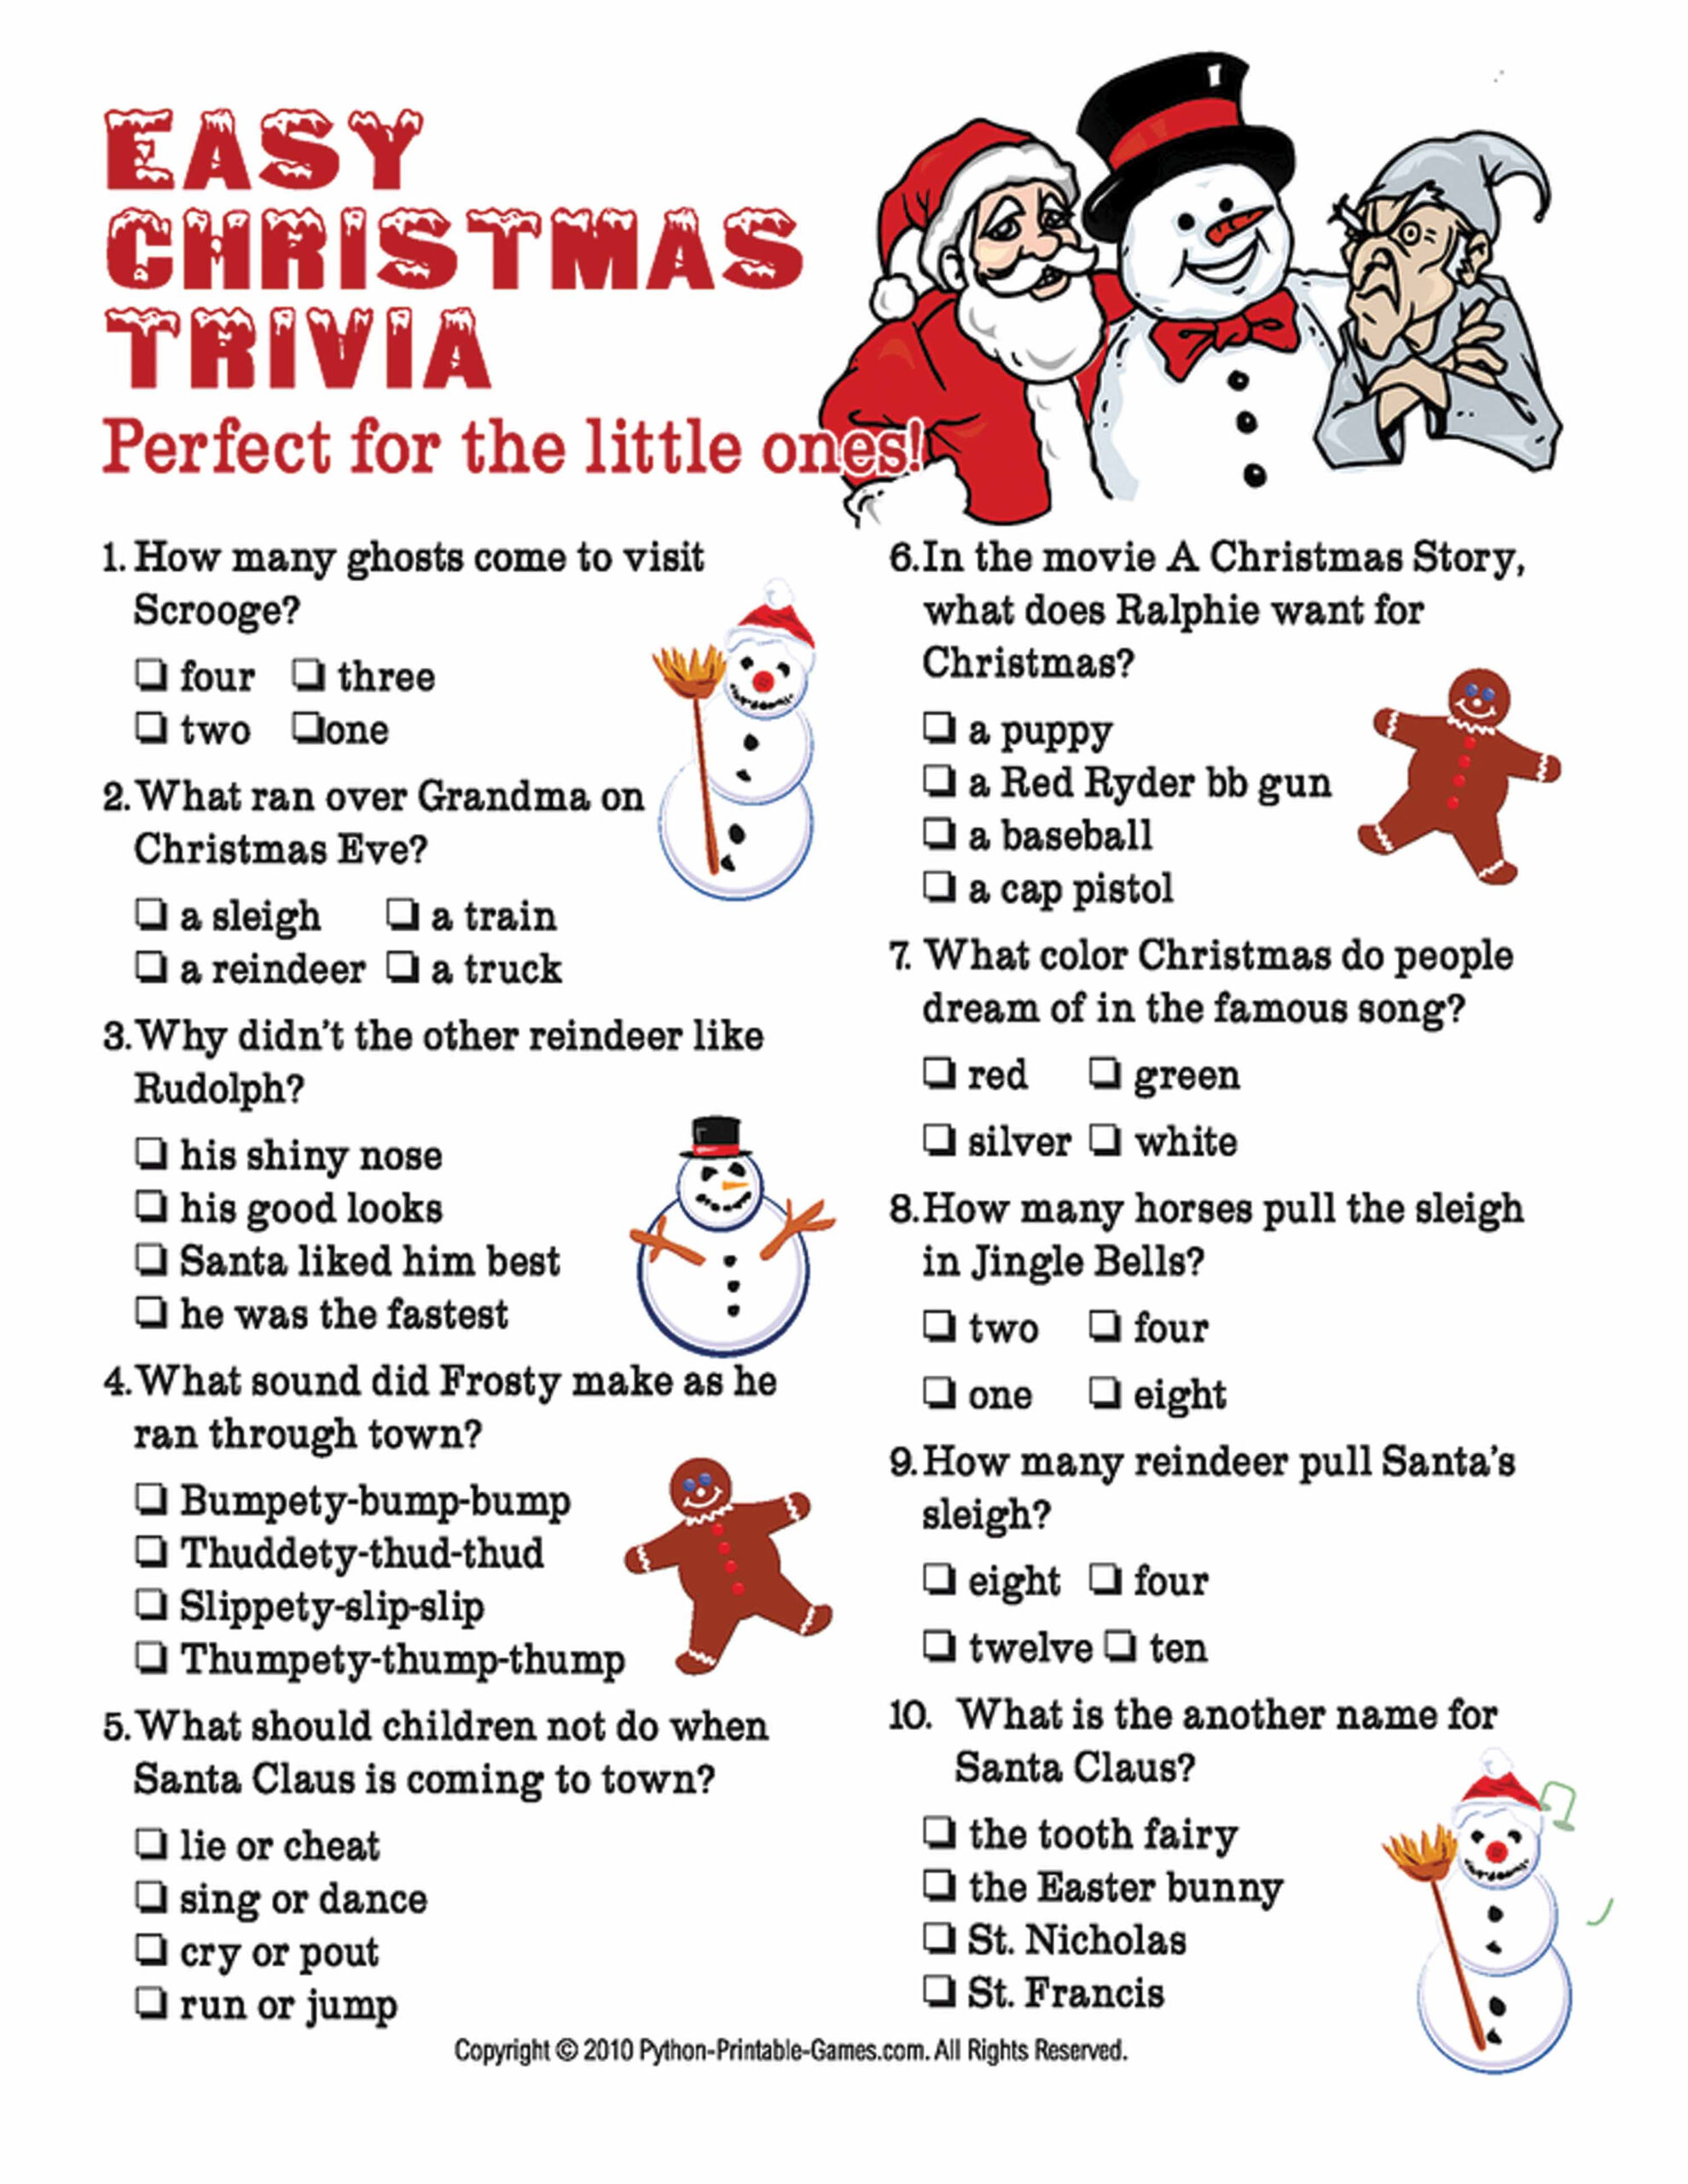 Questions For Christmas Trivia